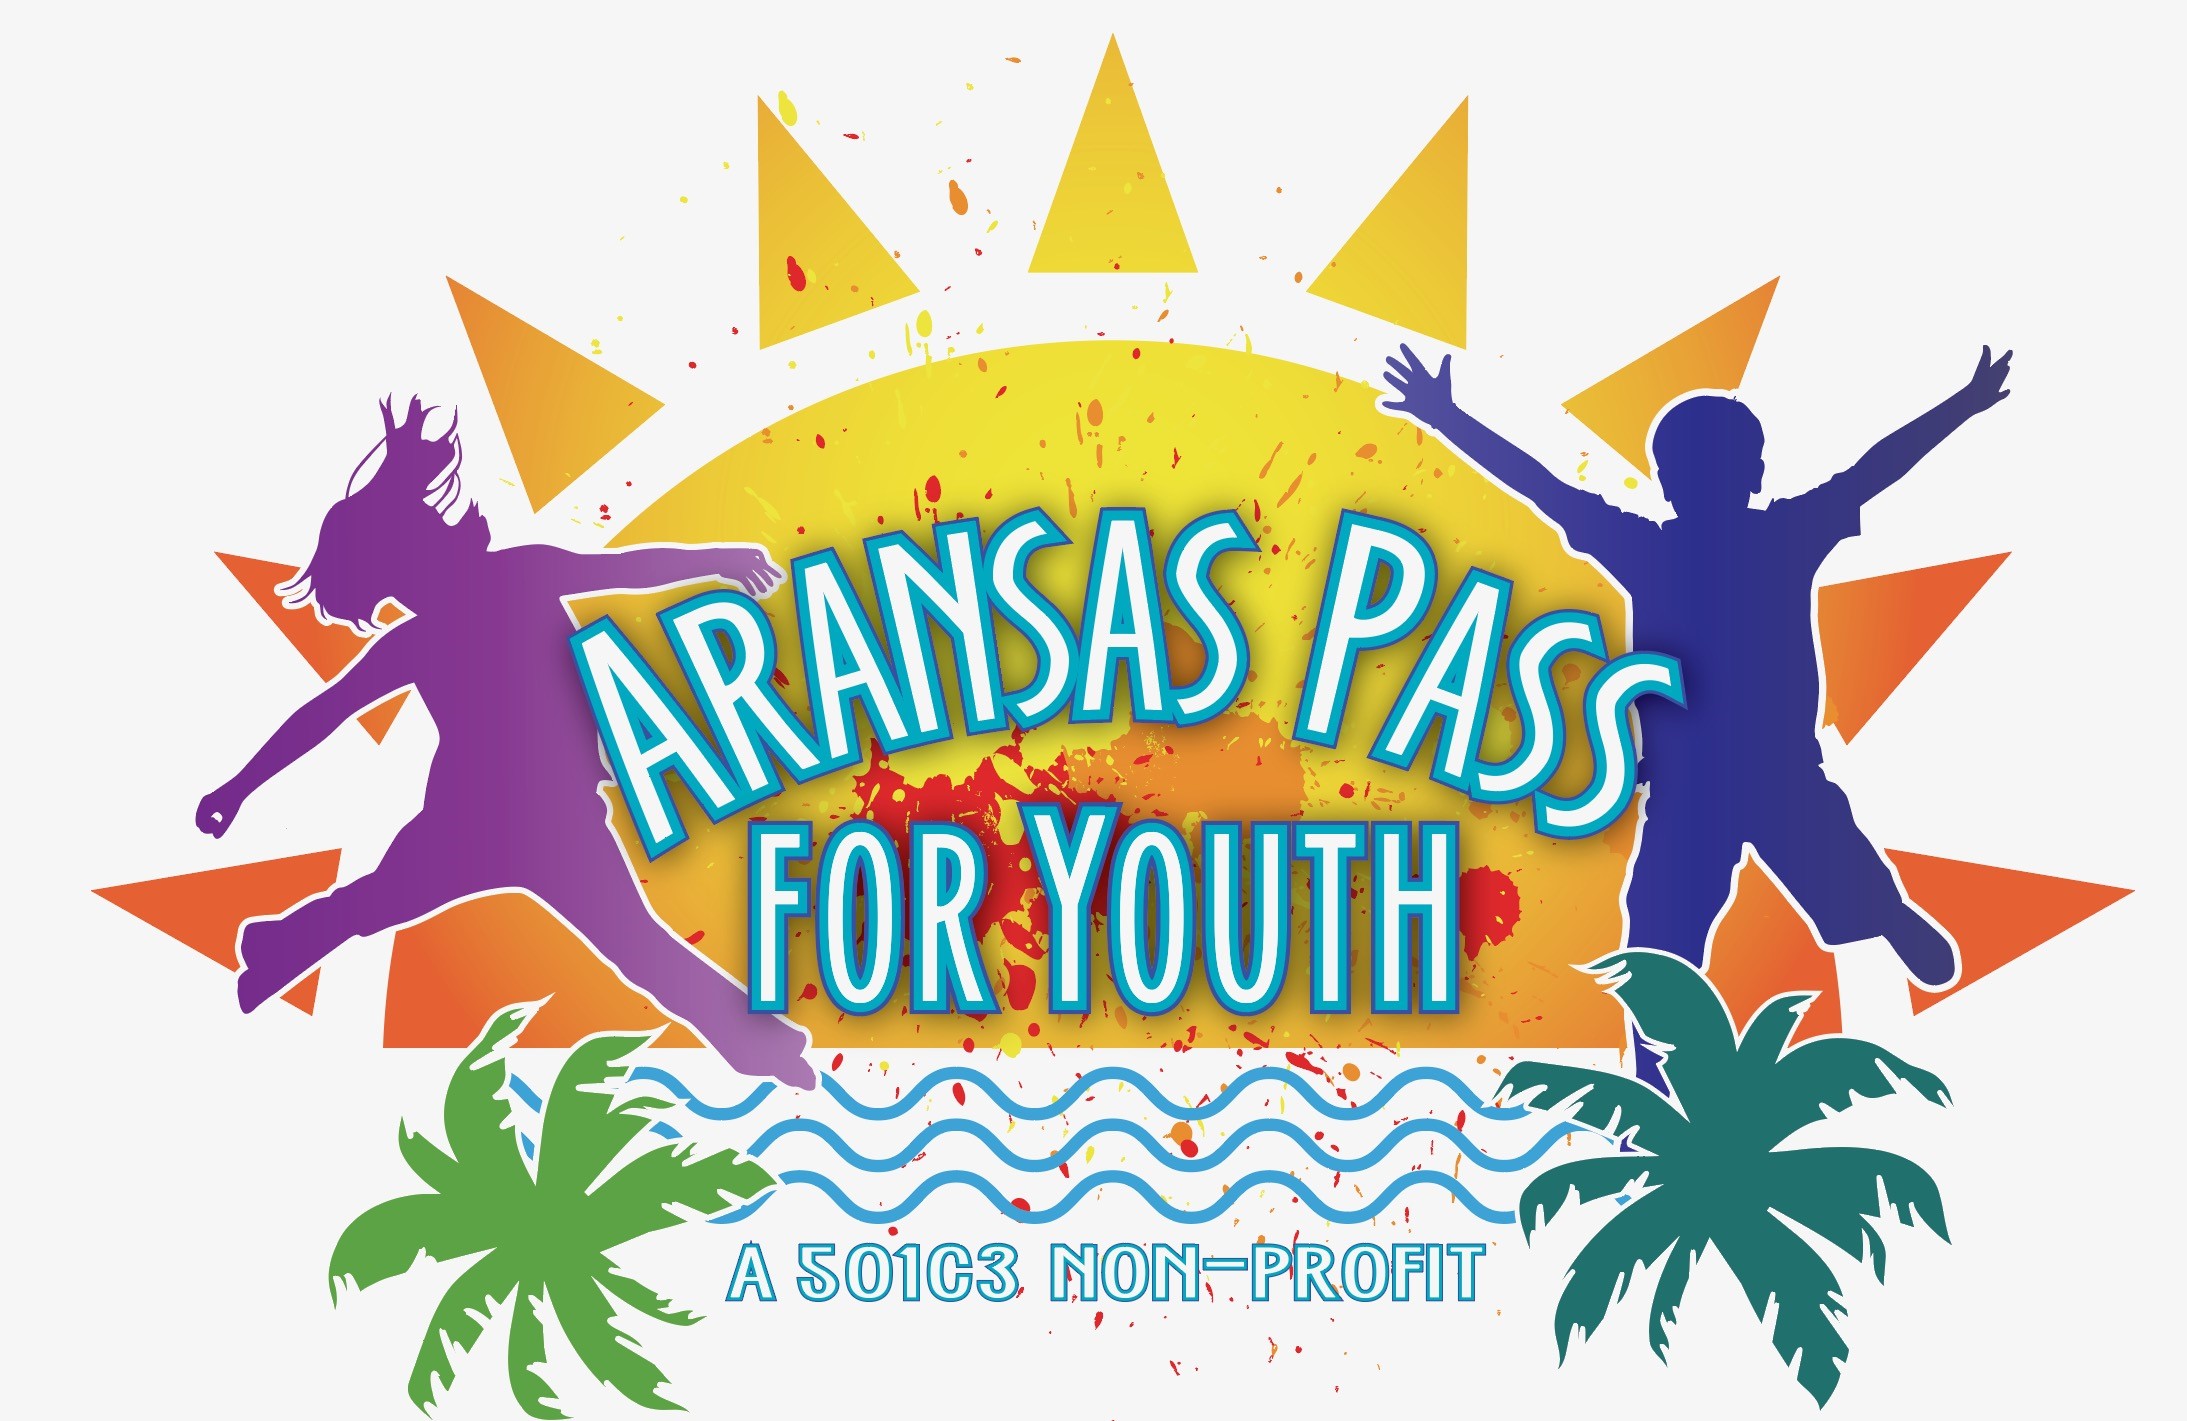 Aransas Pass for Youth 